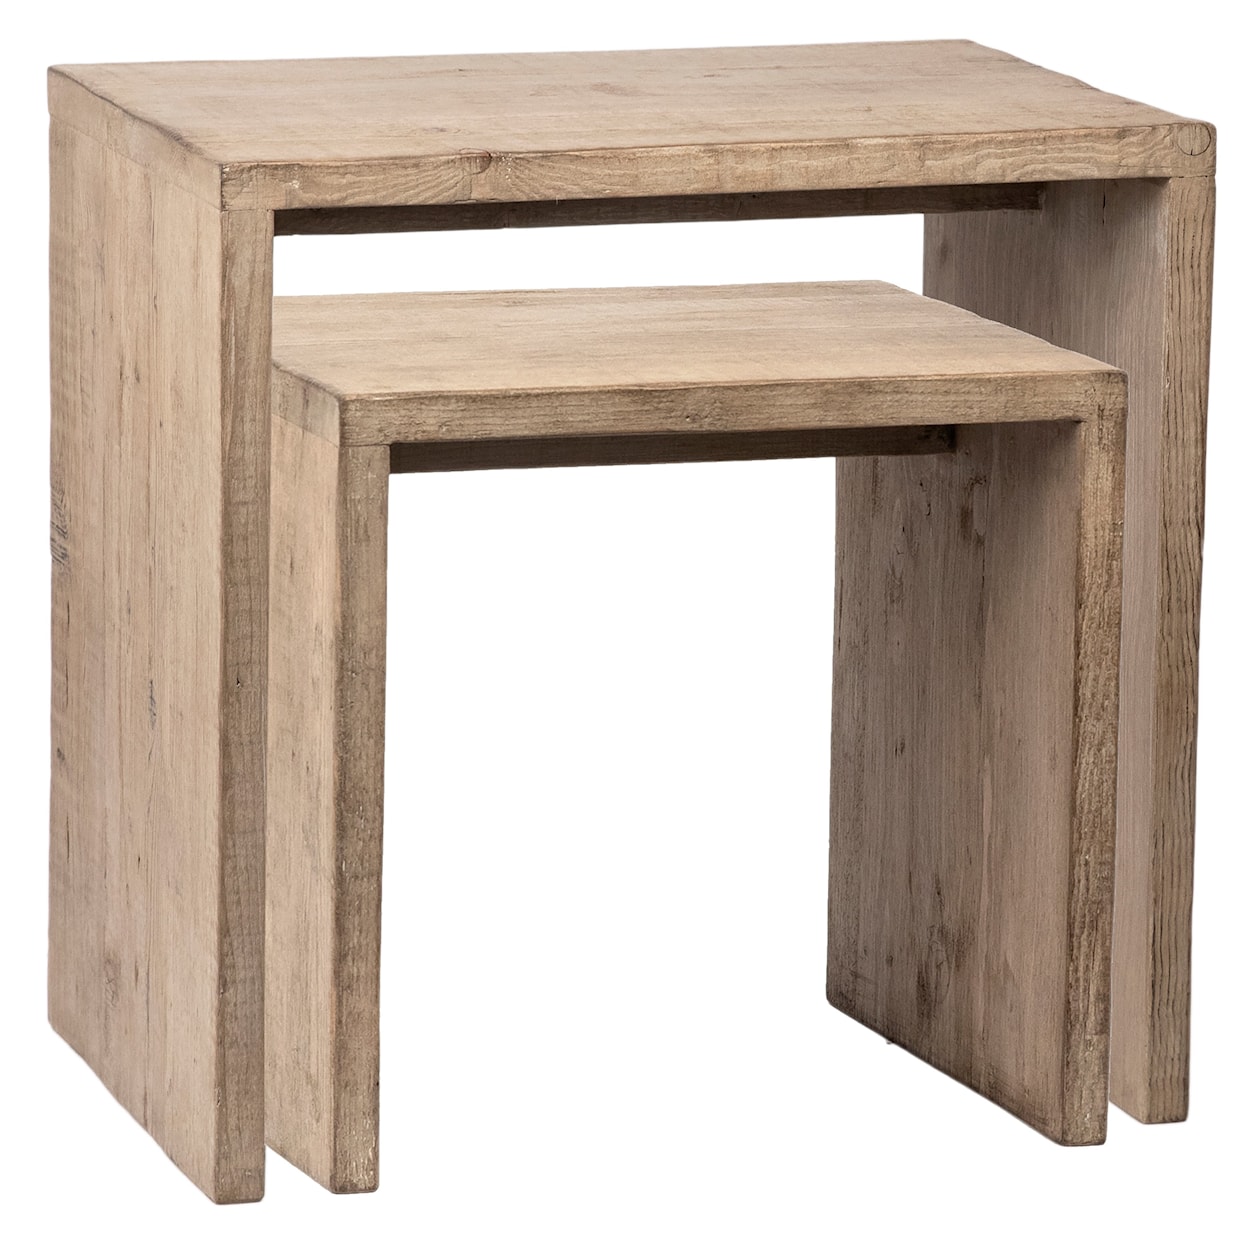 Dovetail Furniture Merwin Nesting Tables